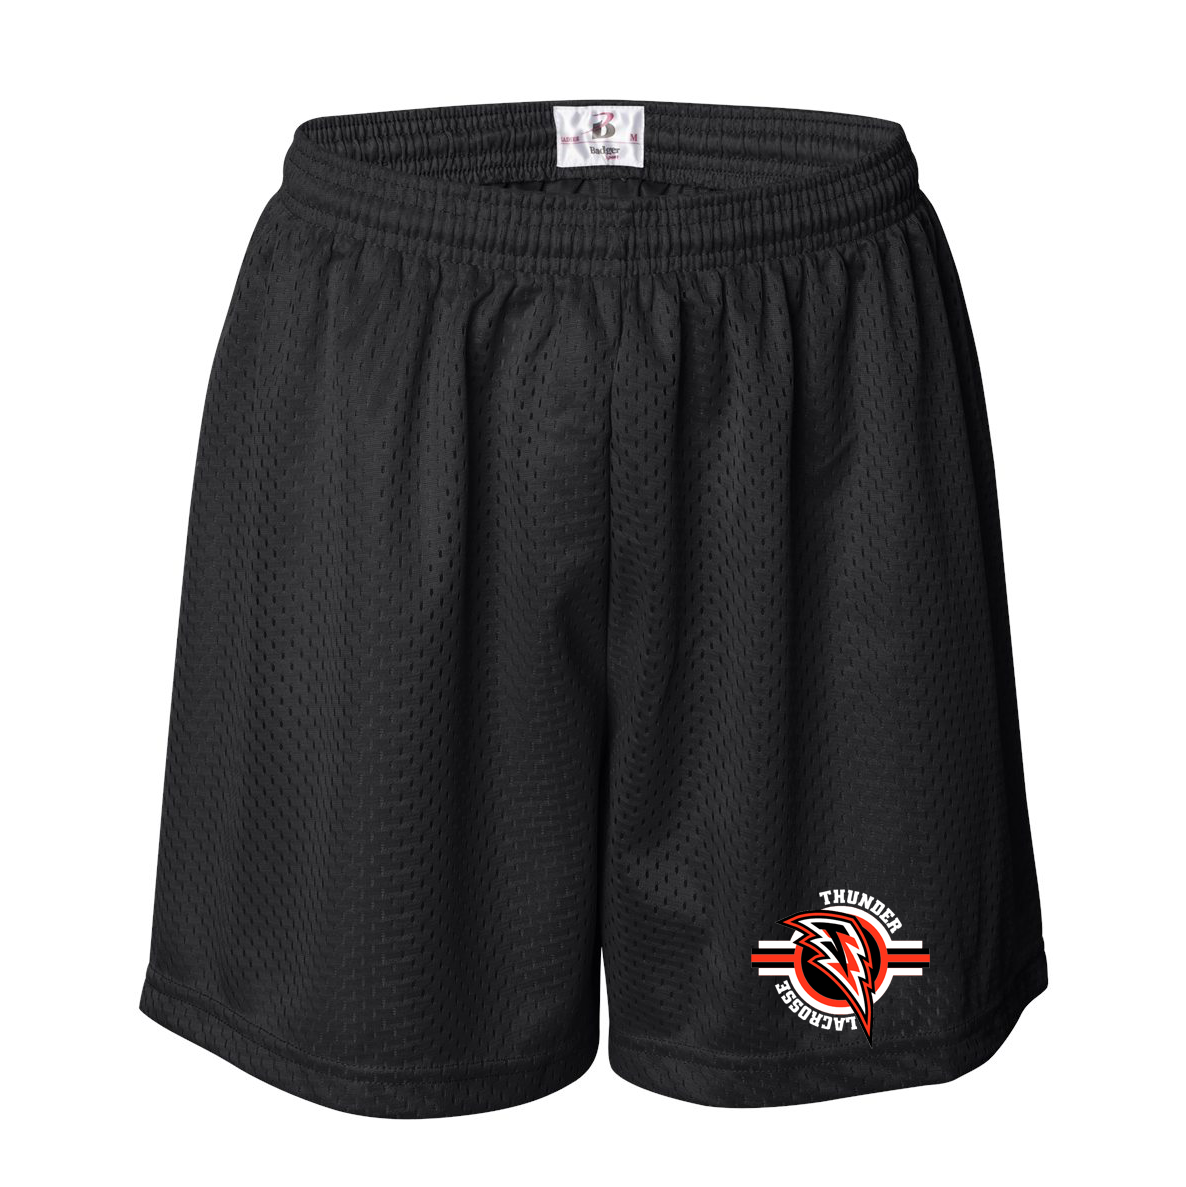 Jersey Thunder Girls Women's Pro Mesh 5" Shorts with Solid Liner